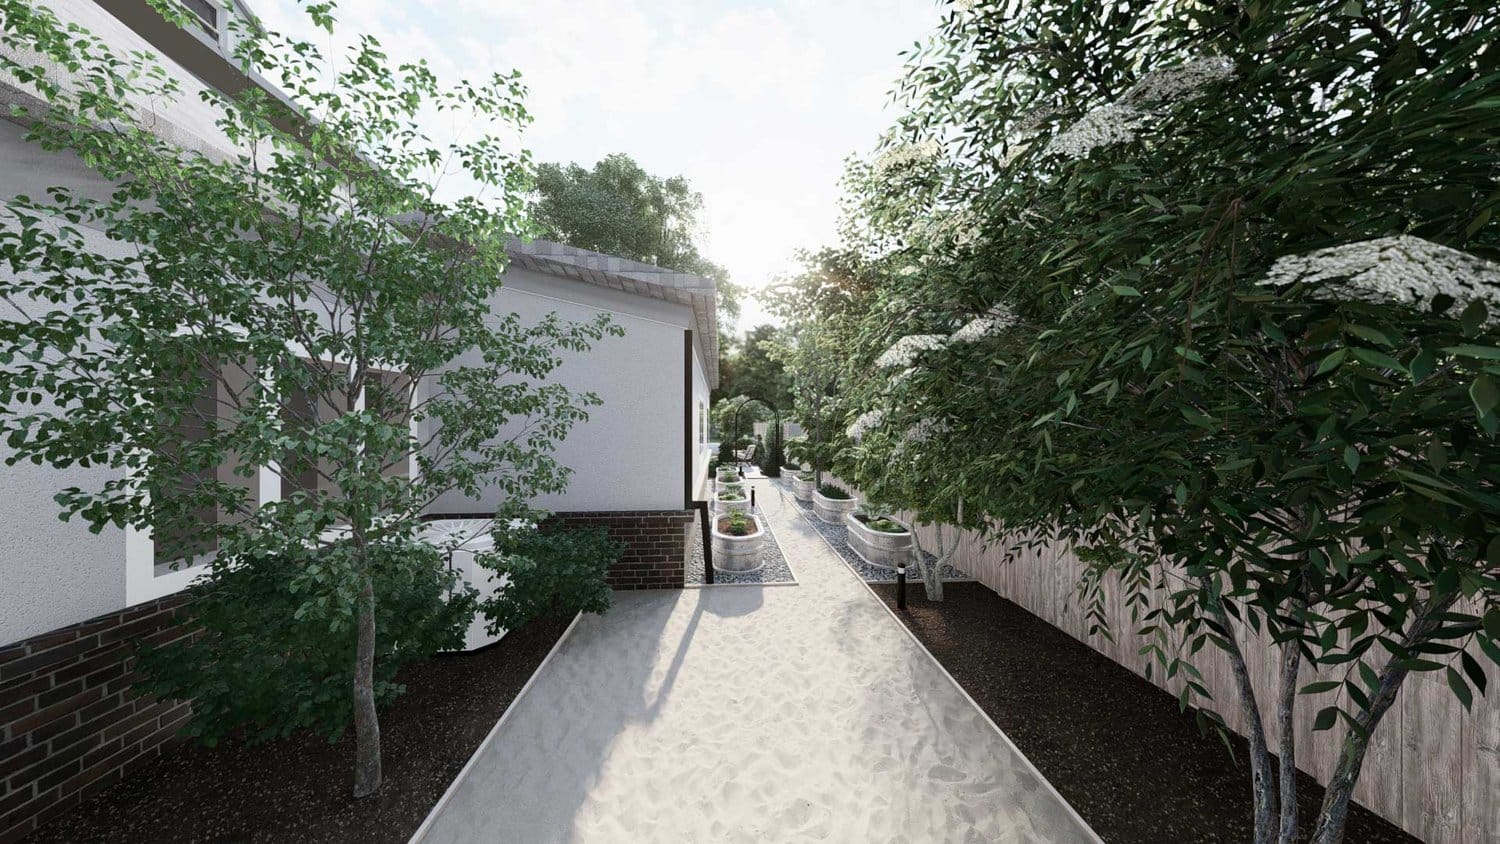 Cambridge side yard with walk way decorated with white sand, planter on graveled floors and trees on the side